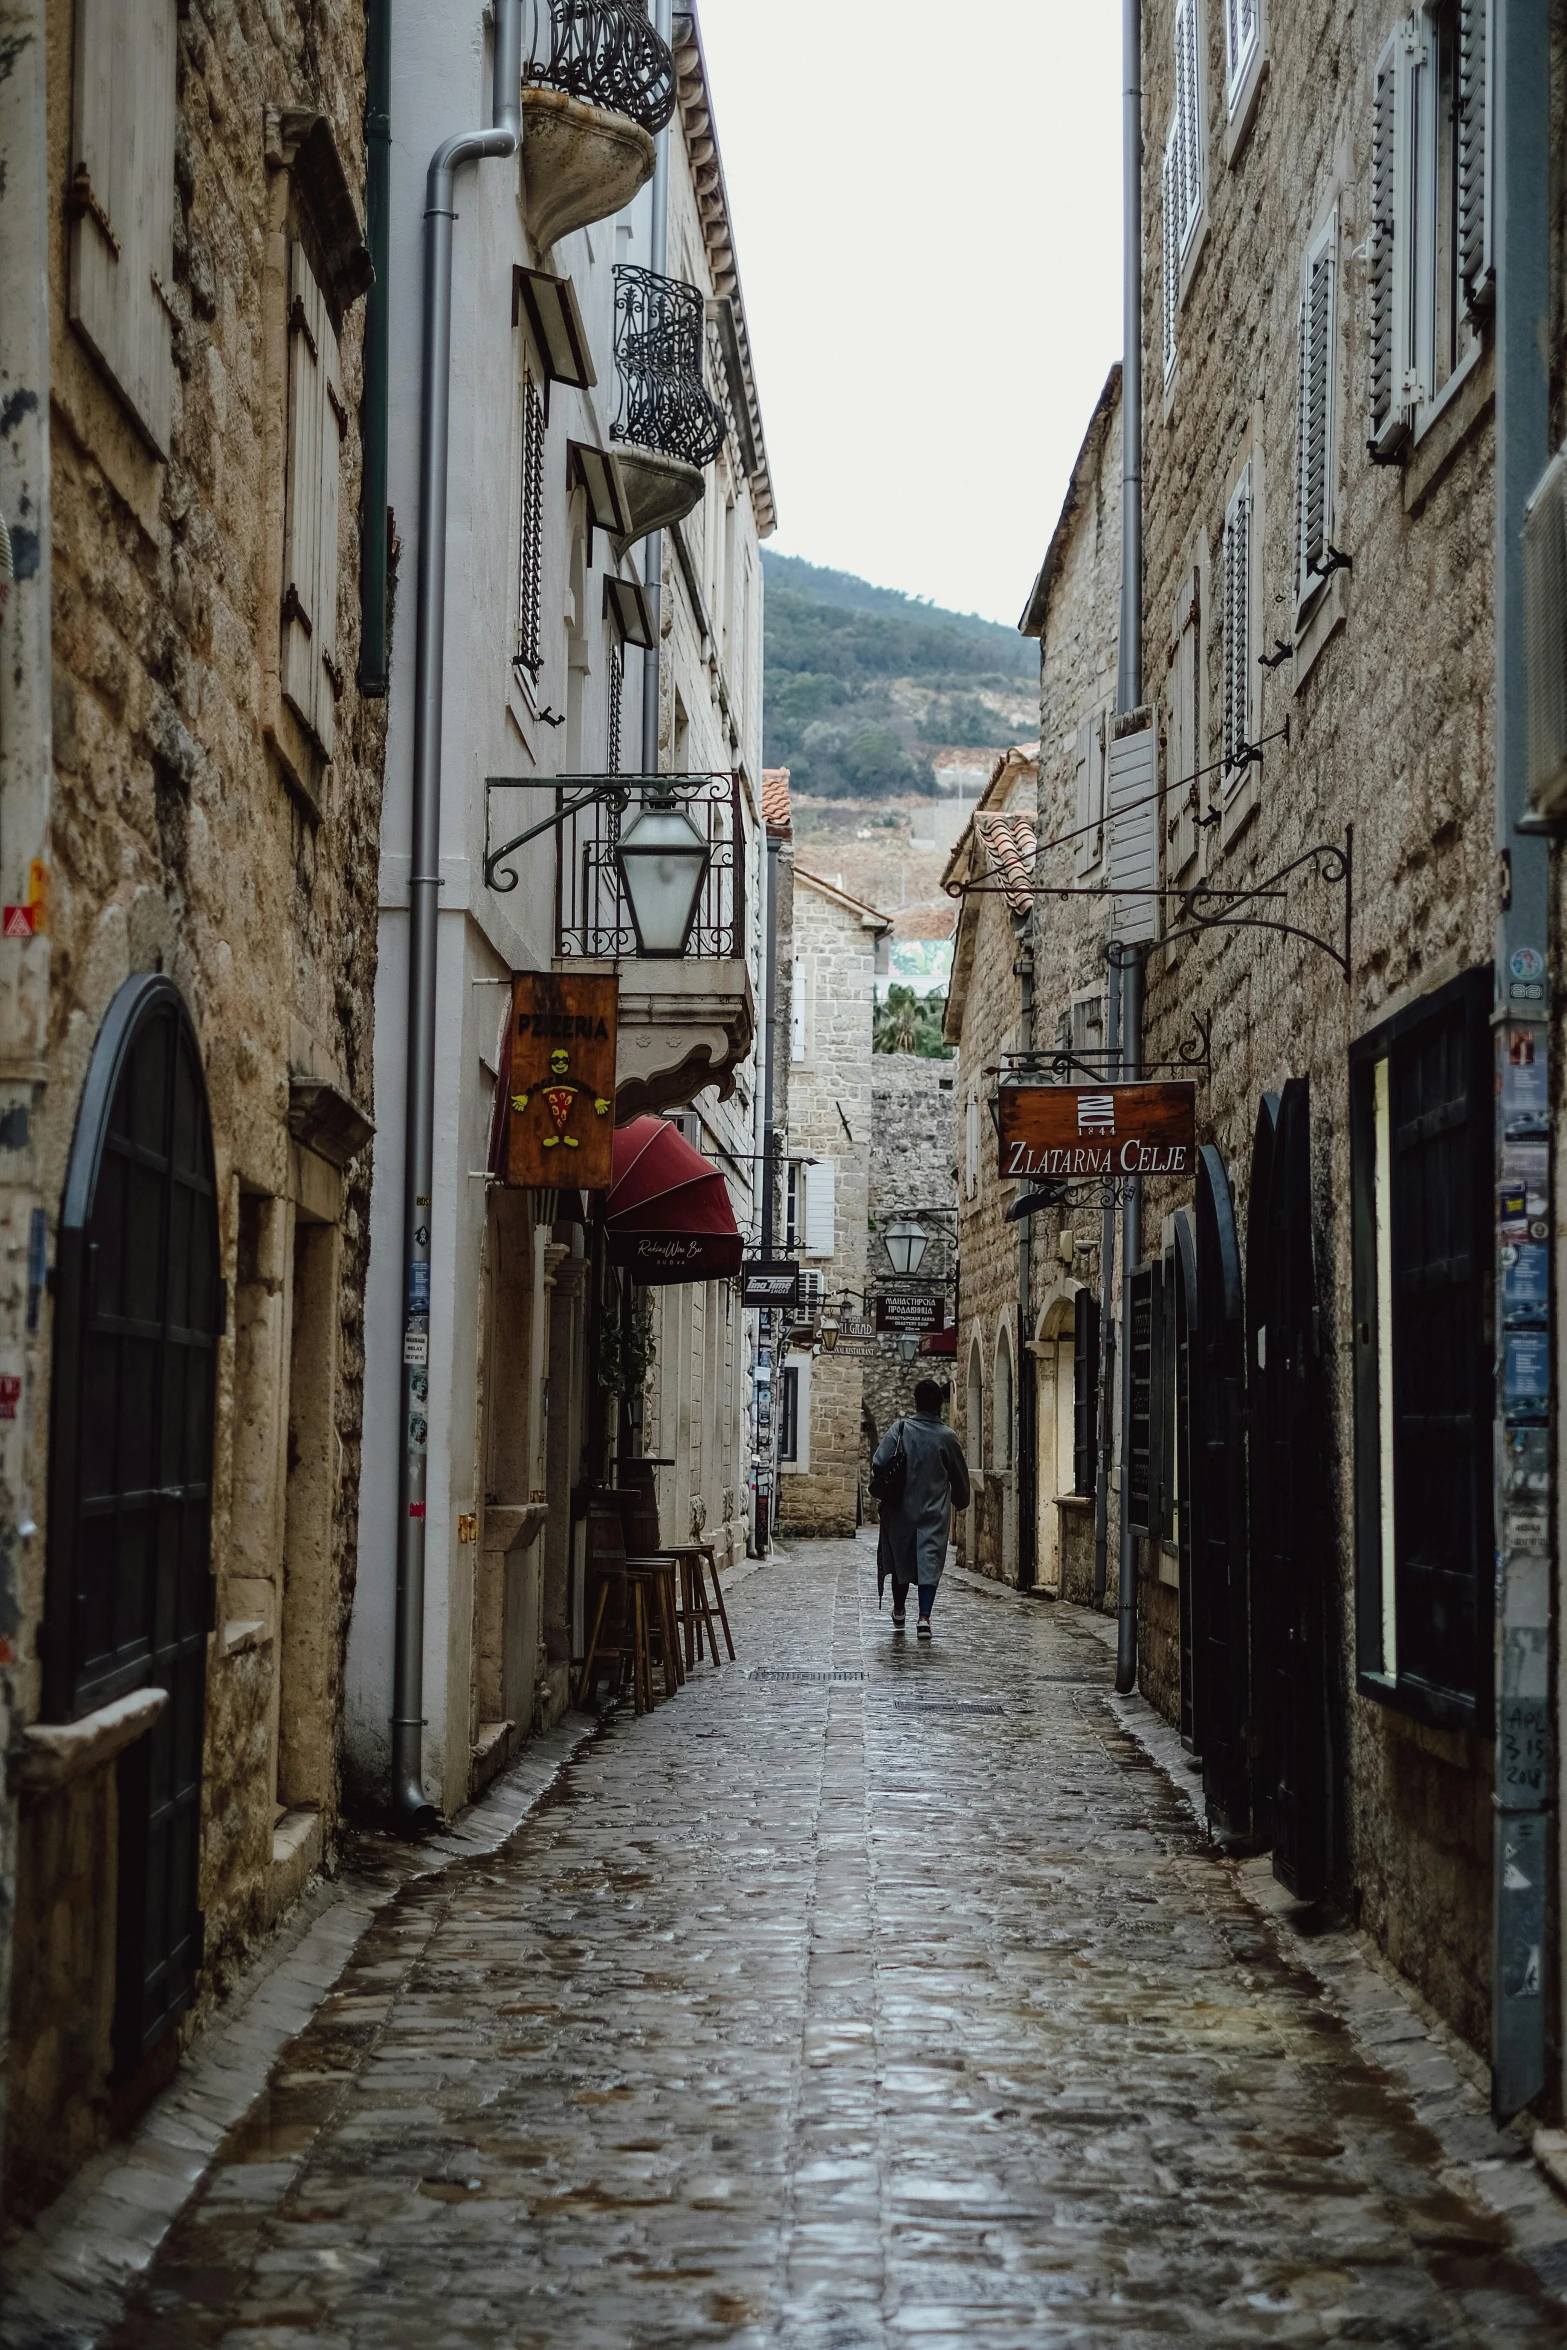 the two men are walking in the narrow alley way